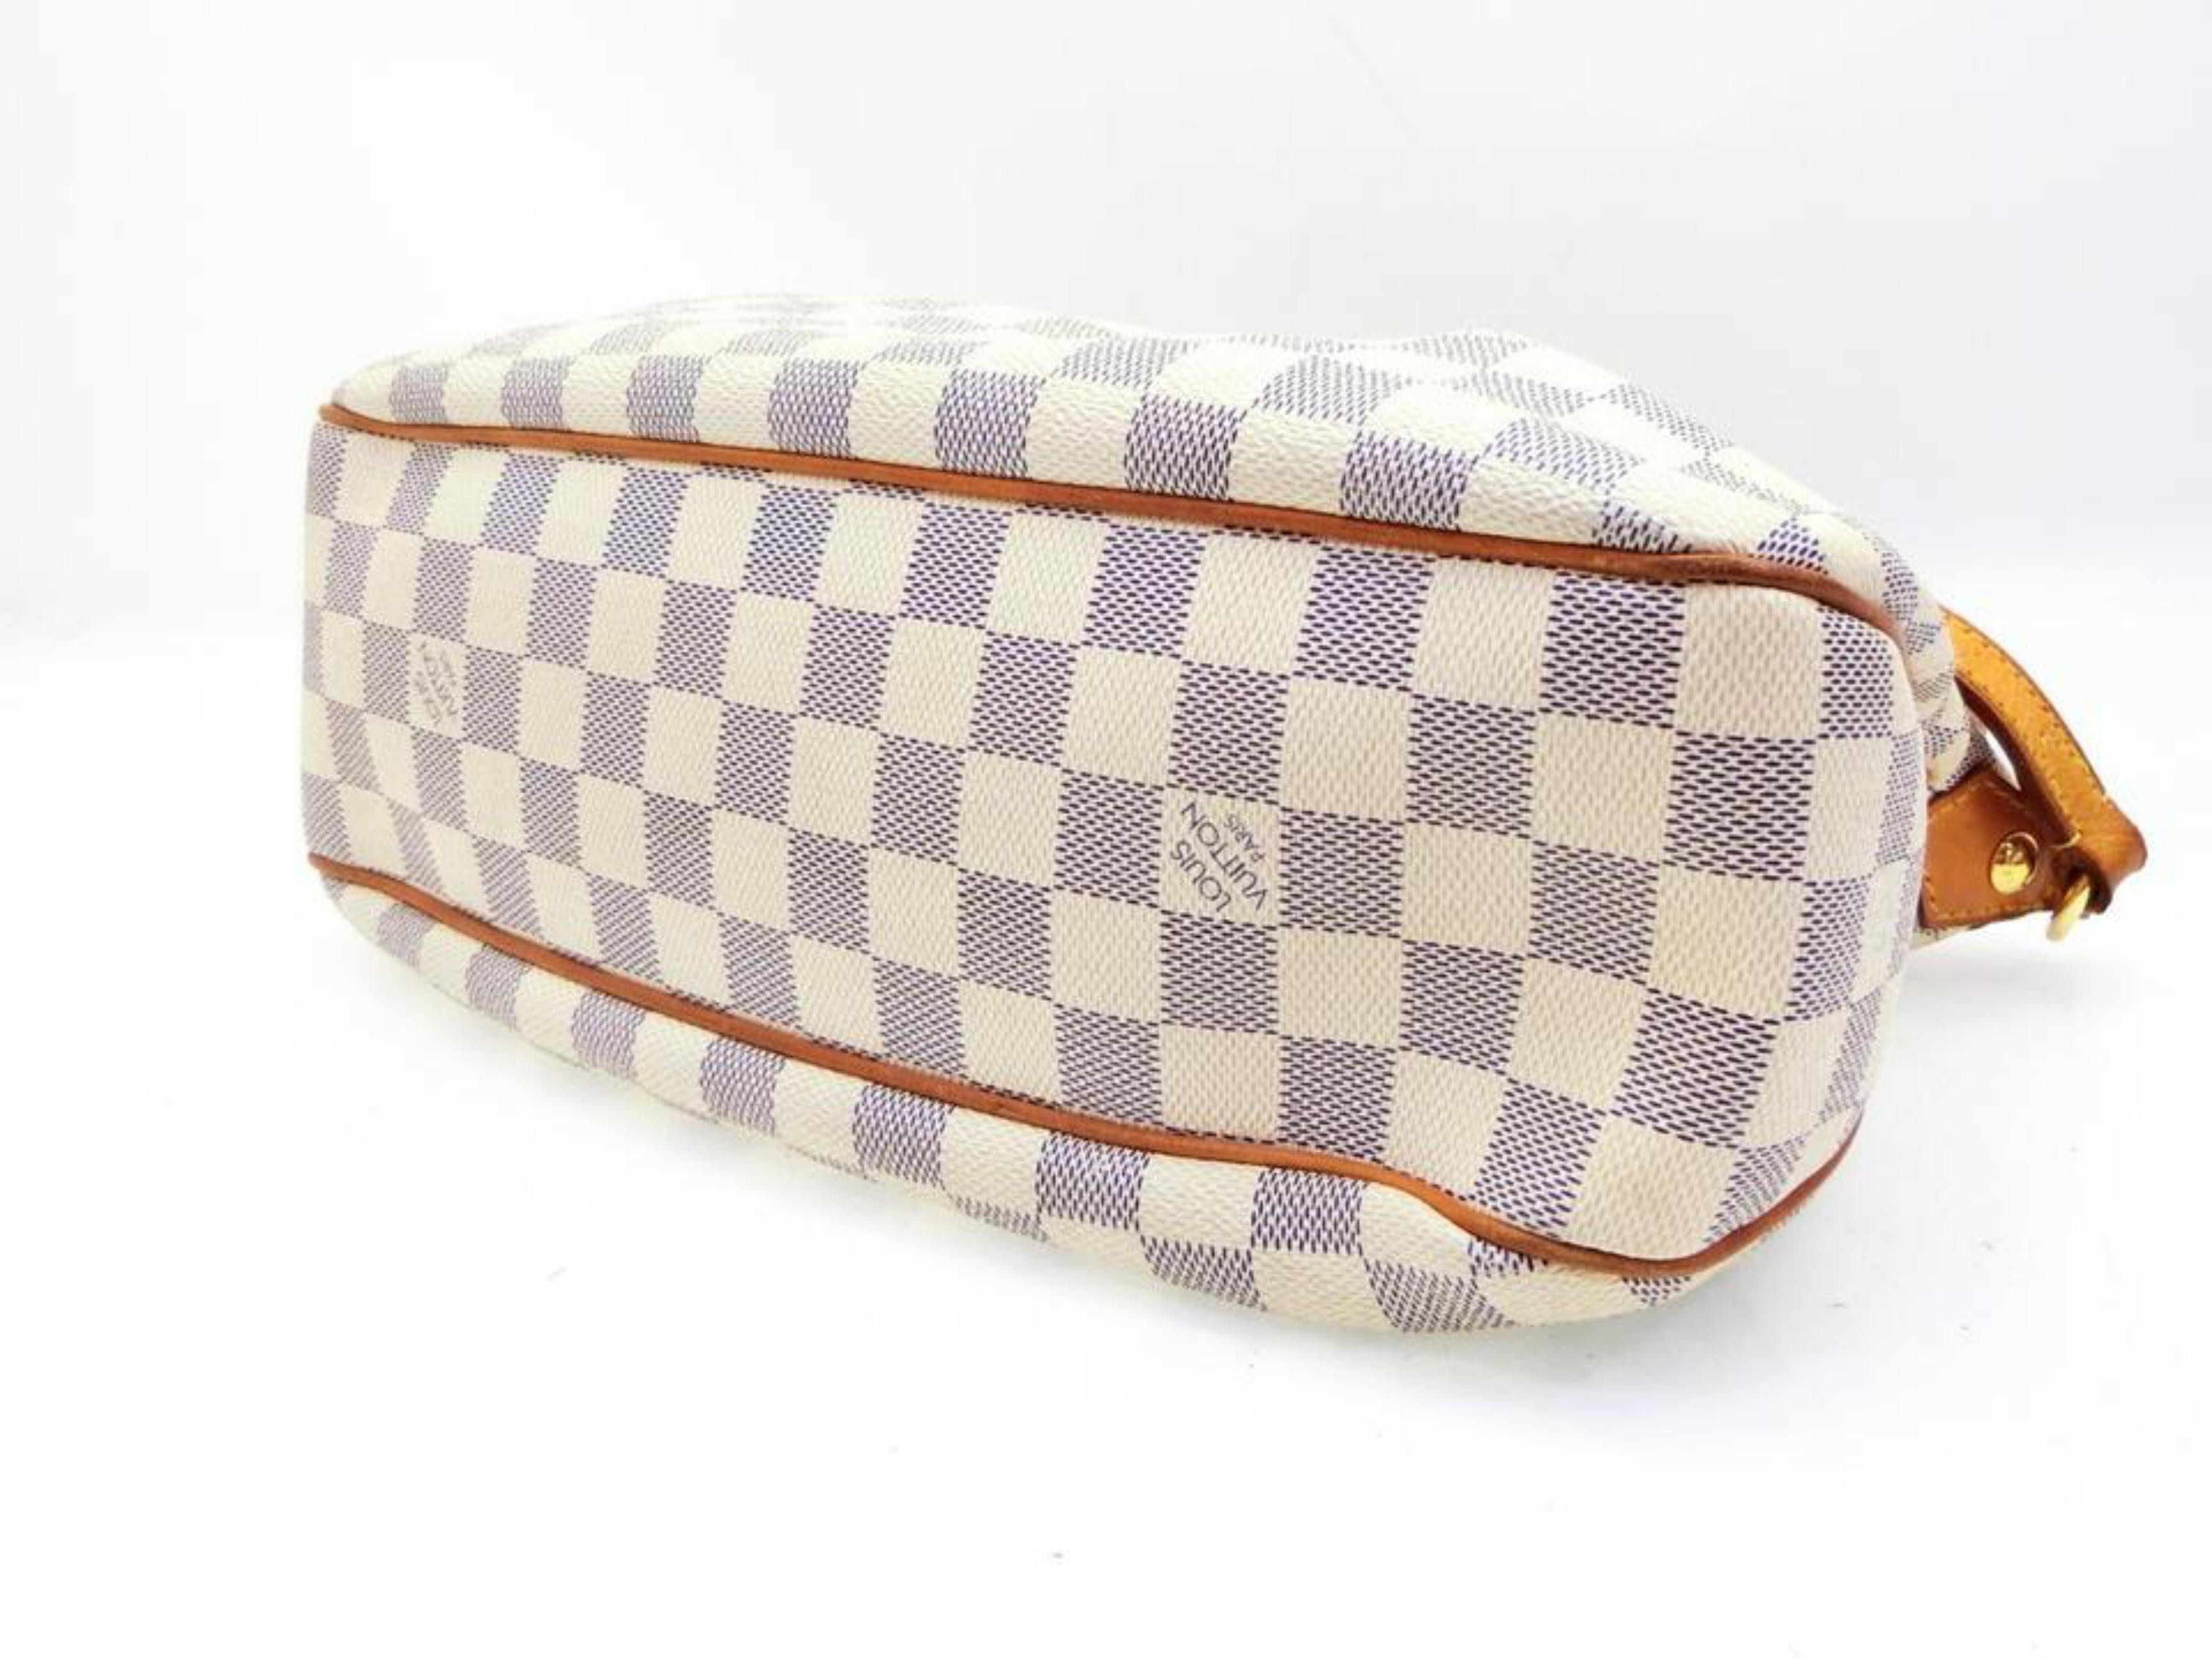 Louis Vuitton Siracusa Damier Azur Pm 234210 White Coated Canvas Cross Body Bag For Sale 6